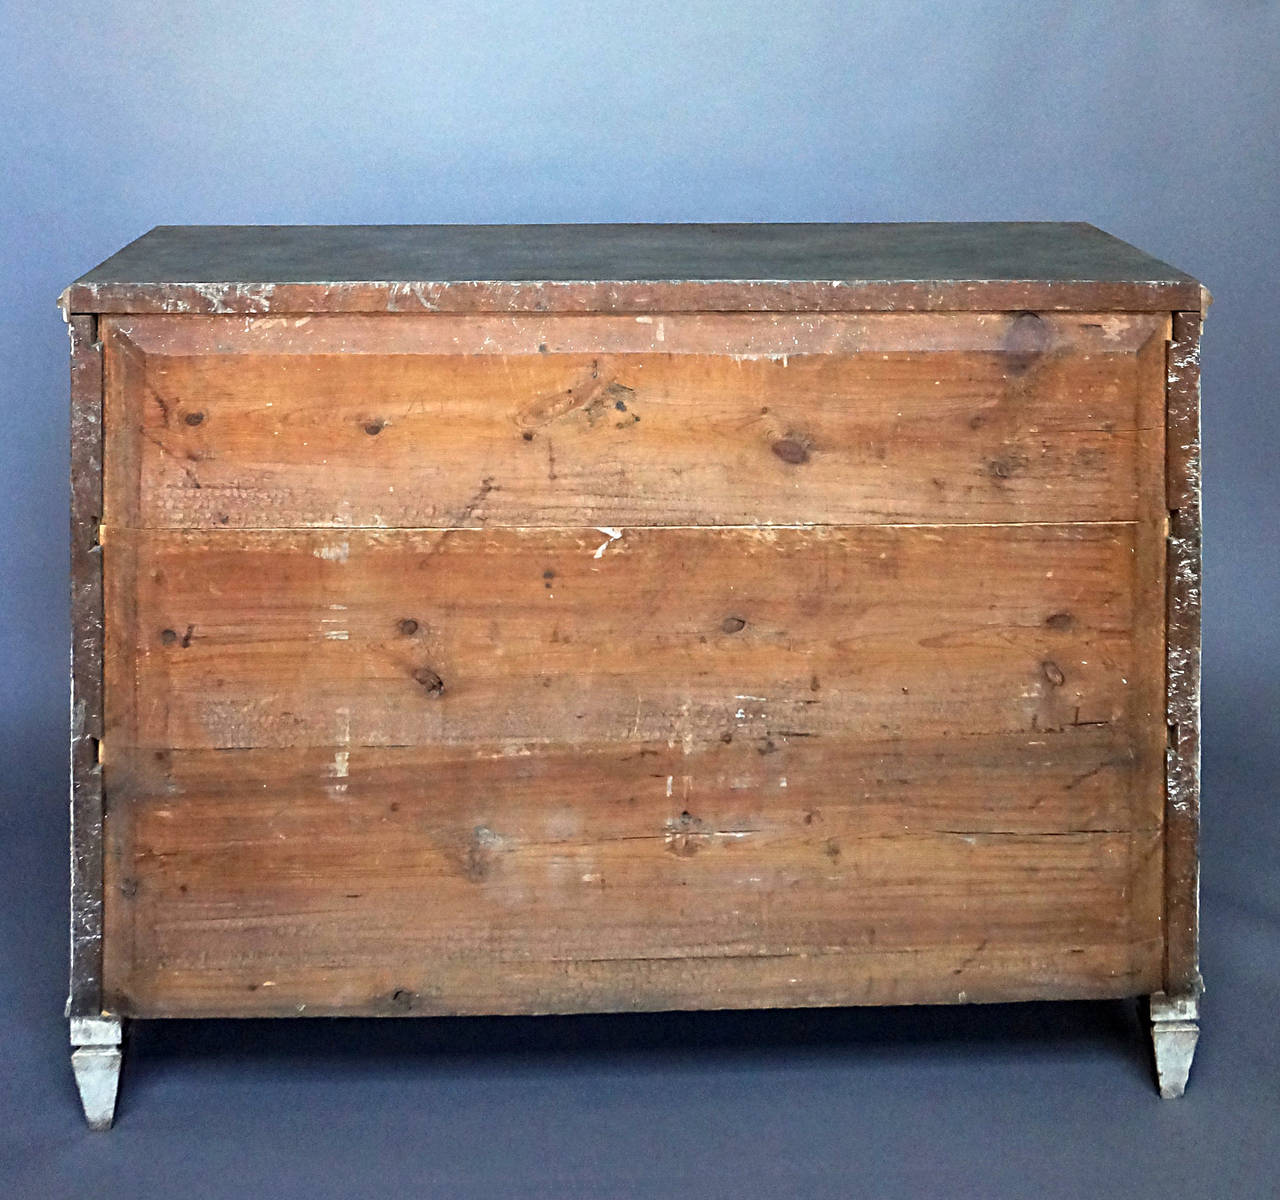 19th Century Gustavian Style Chest of Drawers